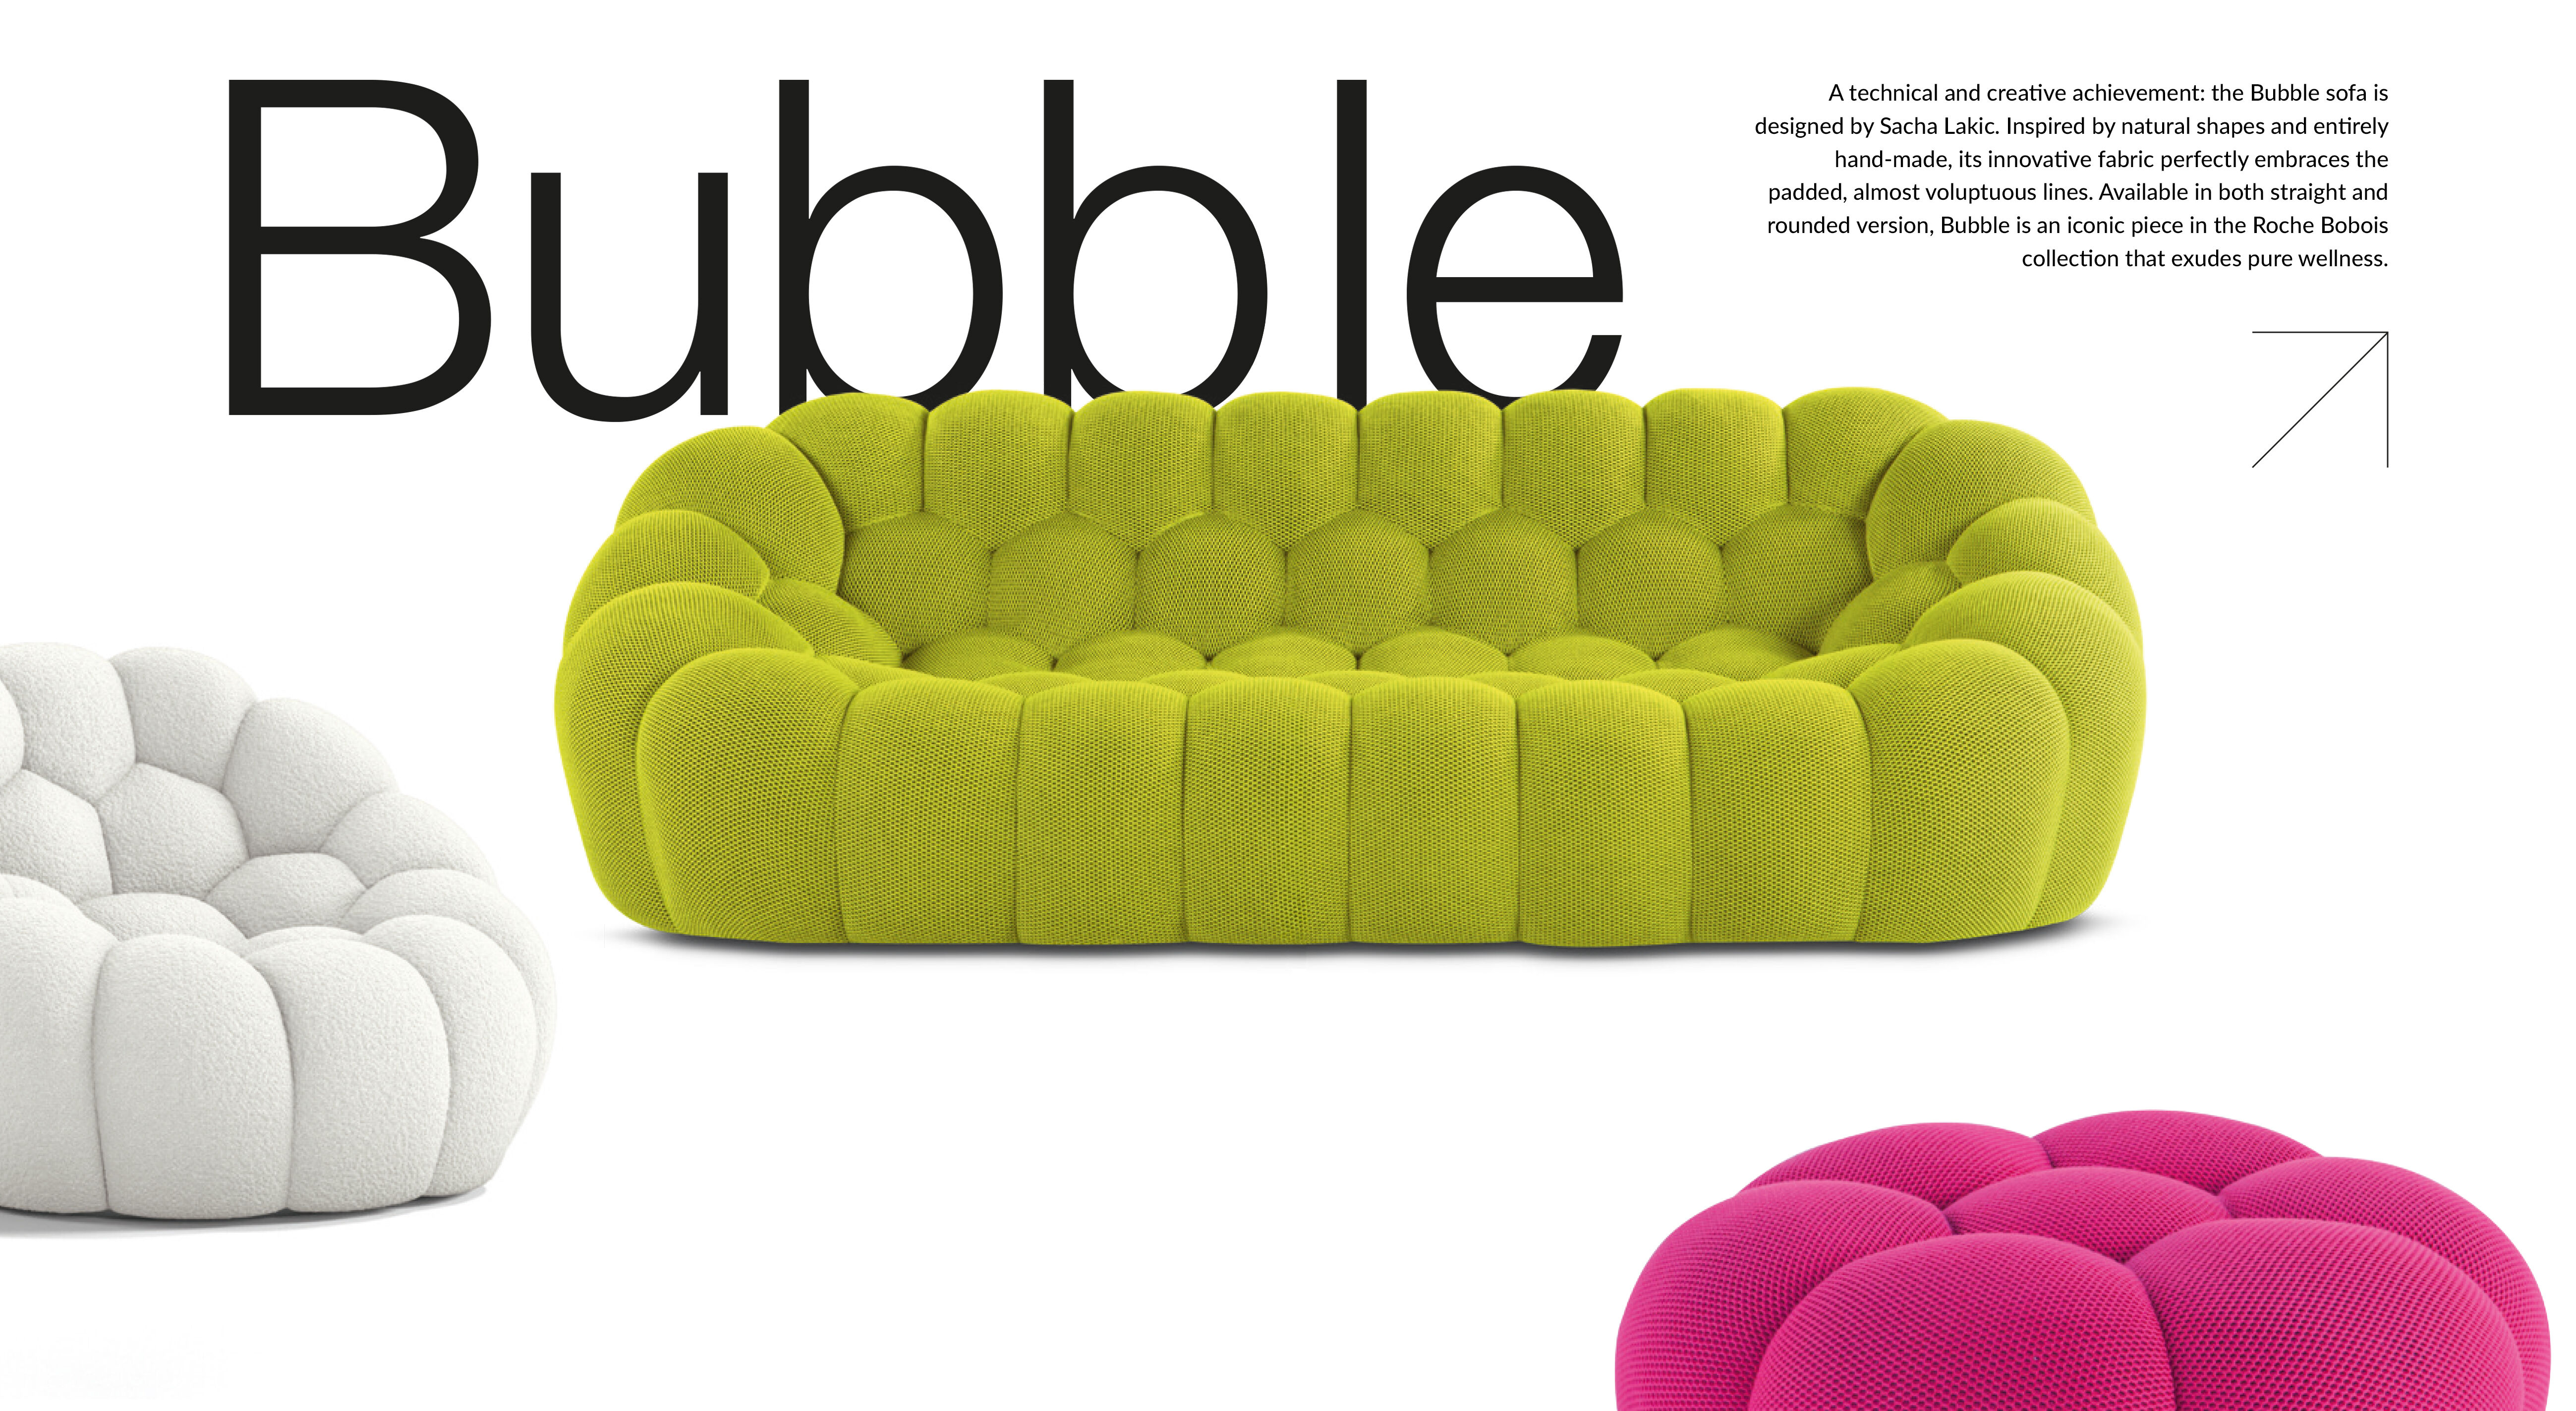 A technical and creative achievement: the Bubble sofa is designed by Sacha Lakic. Inspired by natural shapes and entirely hand-made, its innovative fabric perfectly embraces the padded, almost voluptuous lines. Available in both straight and rounded version, Bubble is an iconic piece in the Roche Bobois collection that exudes pure wellness.